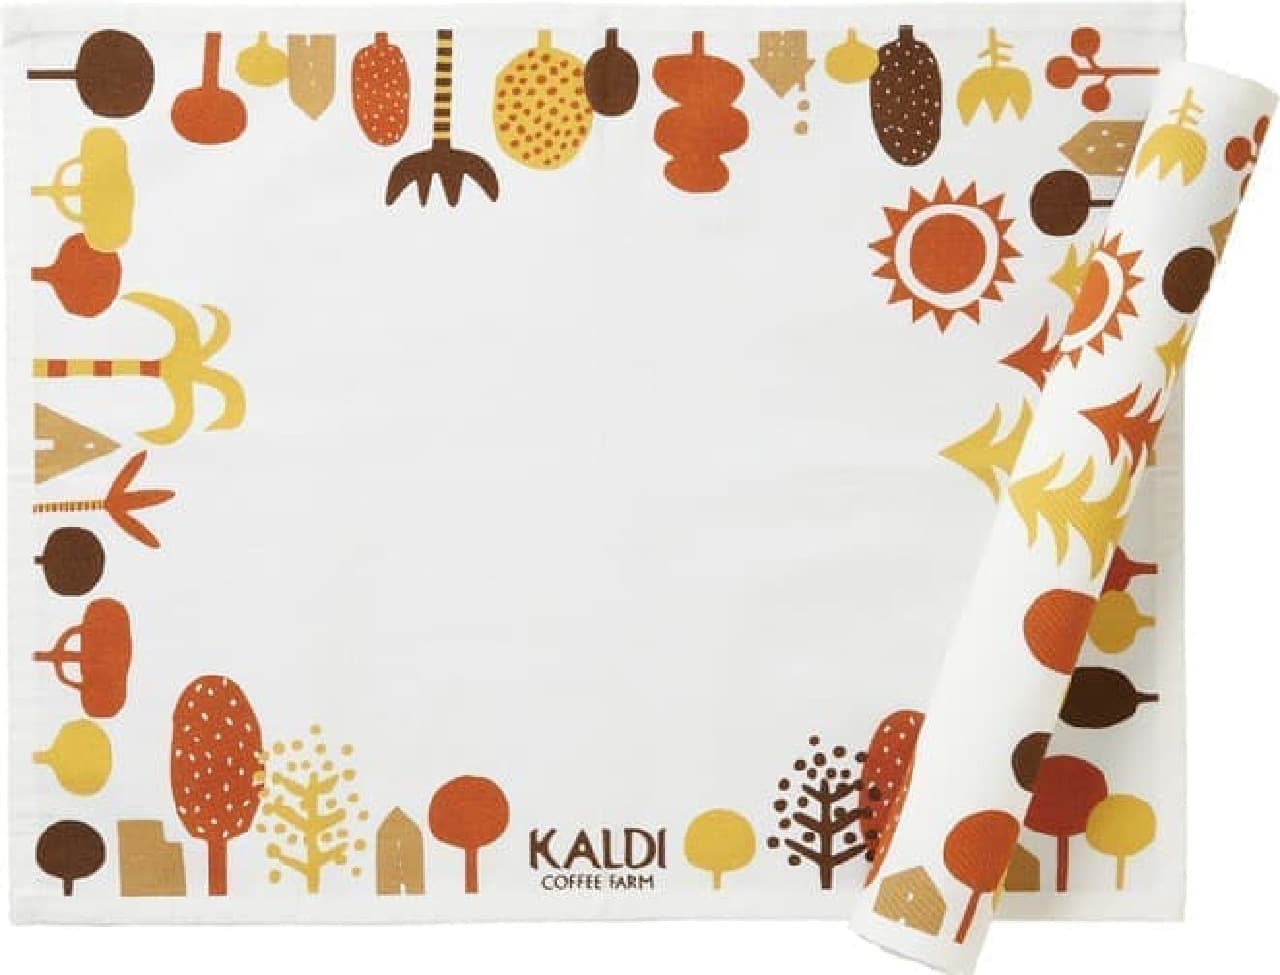 Limited quantity of "Placemat & Drip Coffee Set" for KALDI